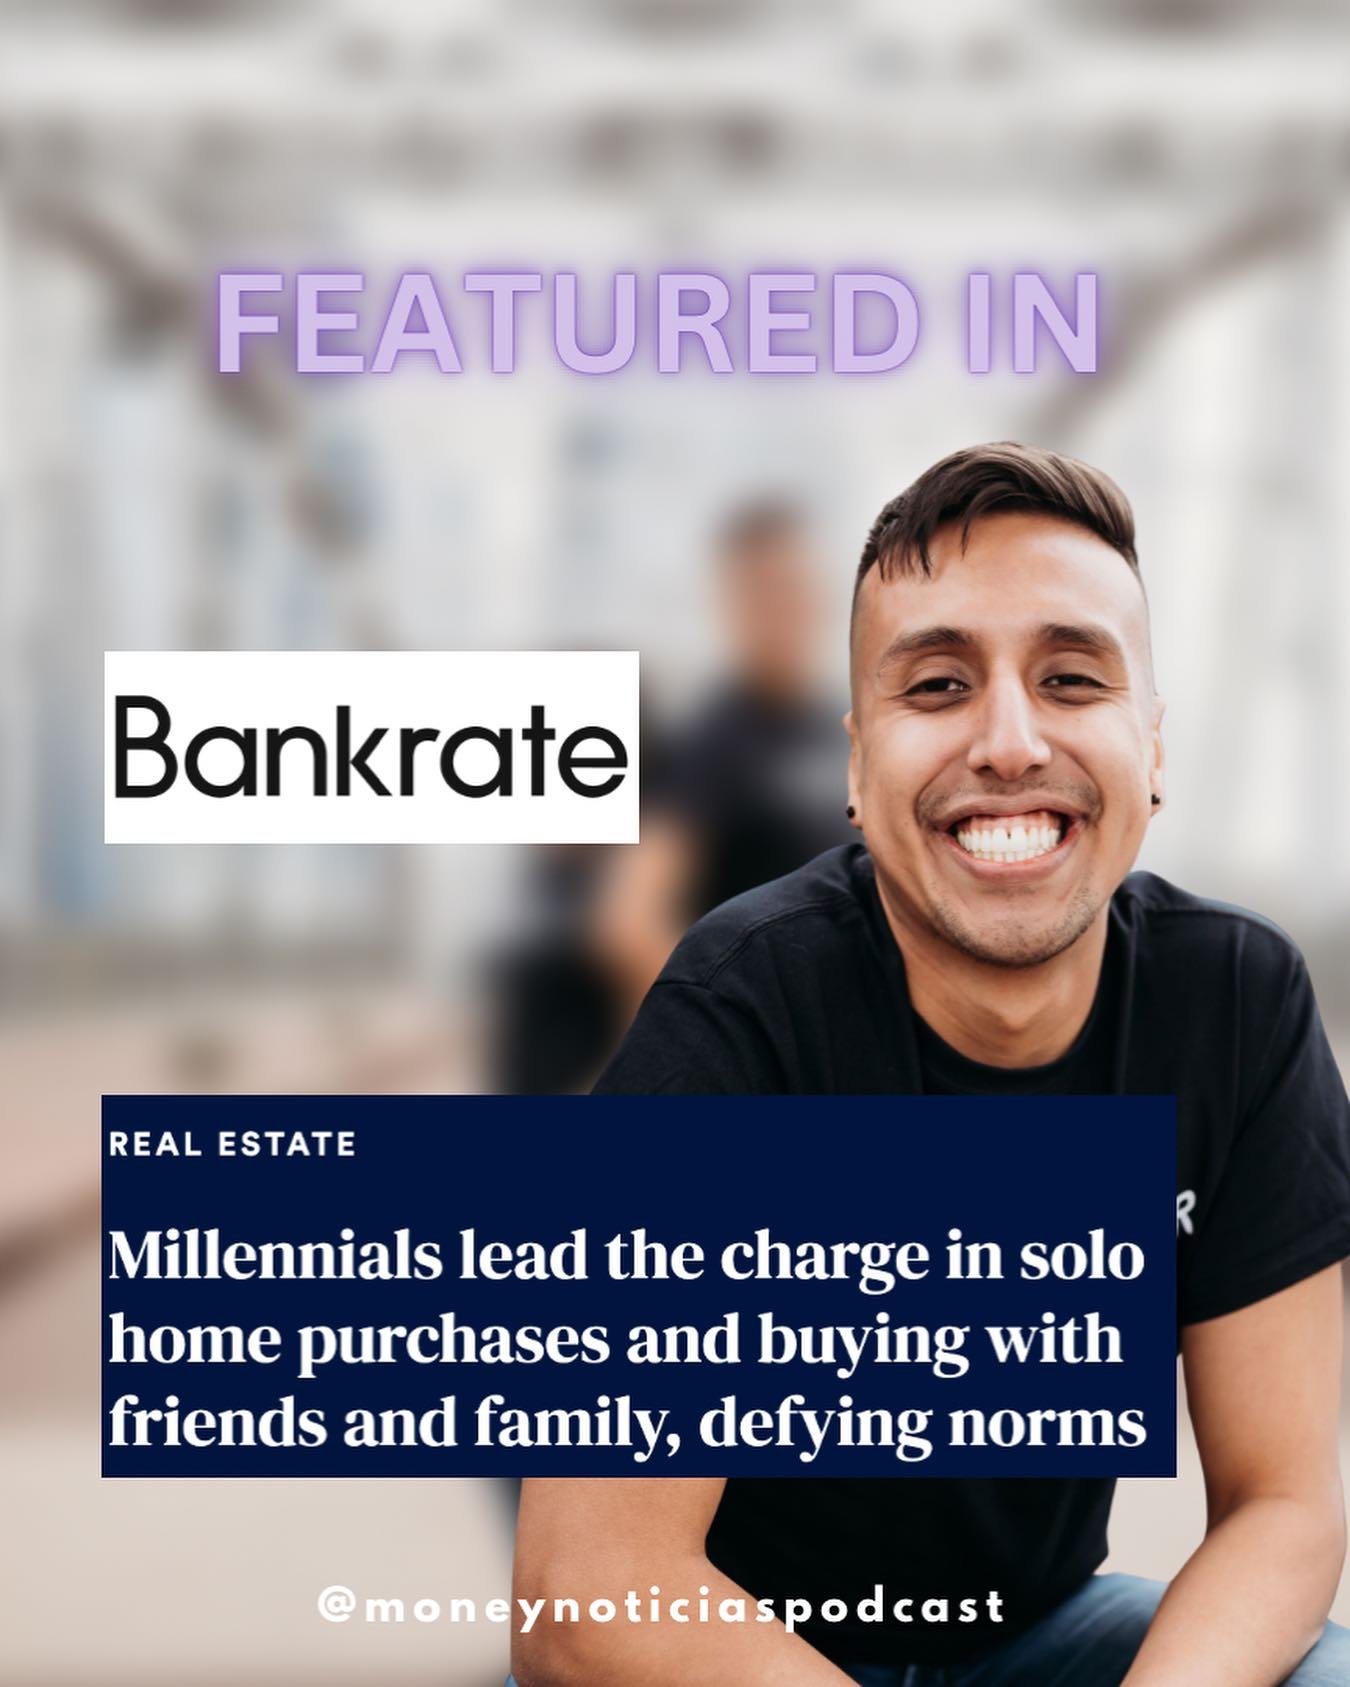 So honored to have been featured @bankrate 

We out here debunking the myth that the only way to build wealth is through owning property. Immigrants are especially socialized to believe this, but we out here spreading this edumacation that there are 